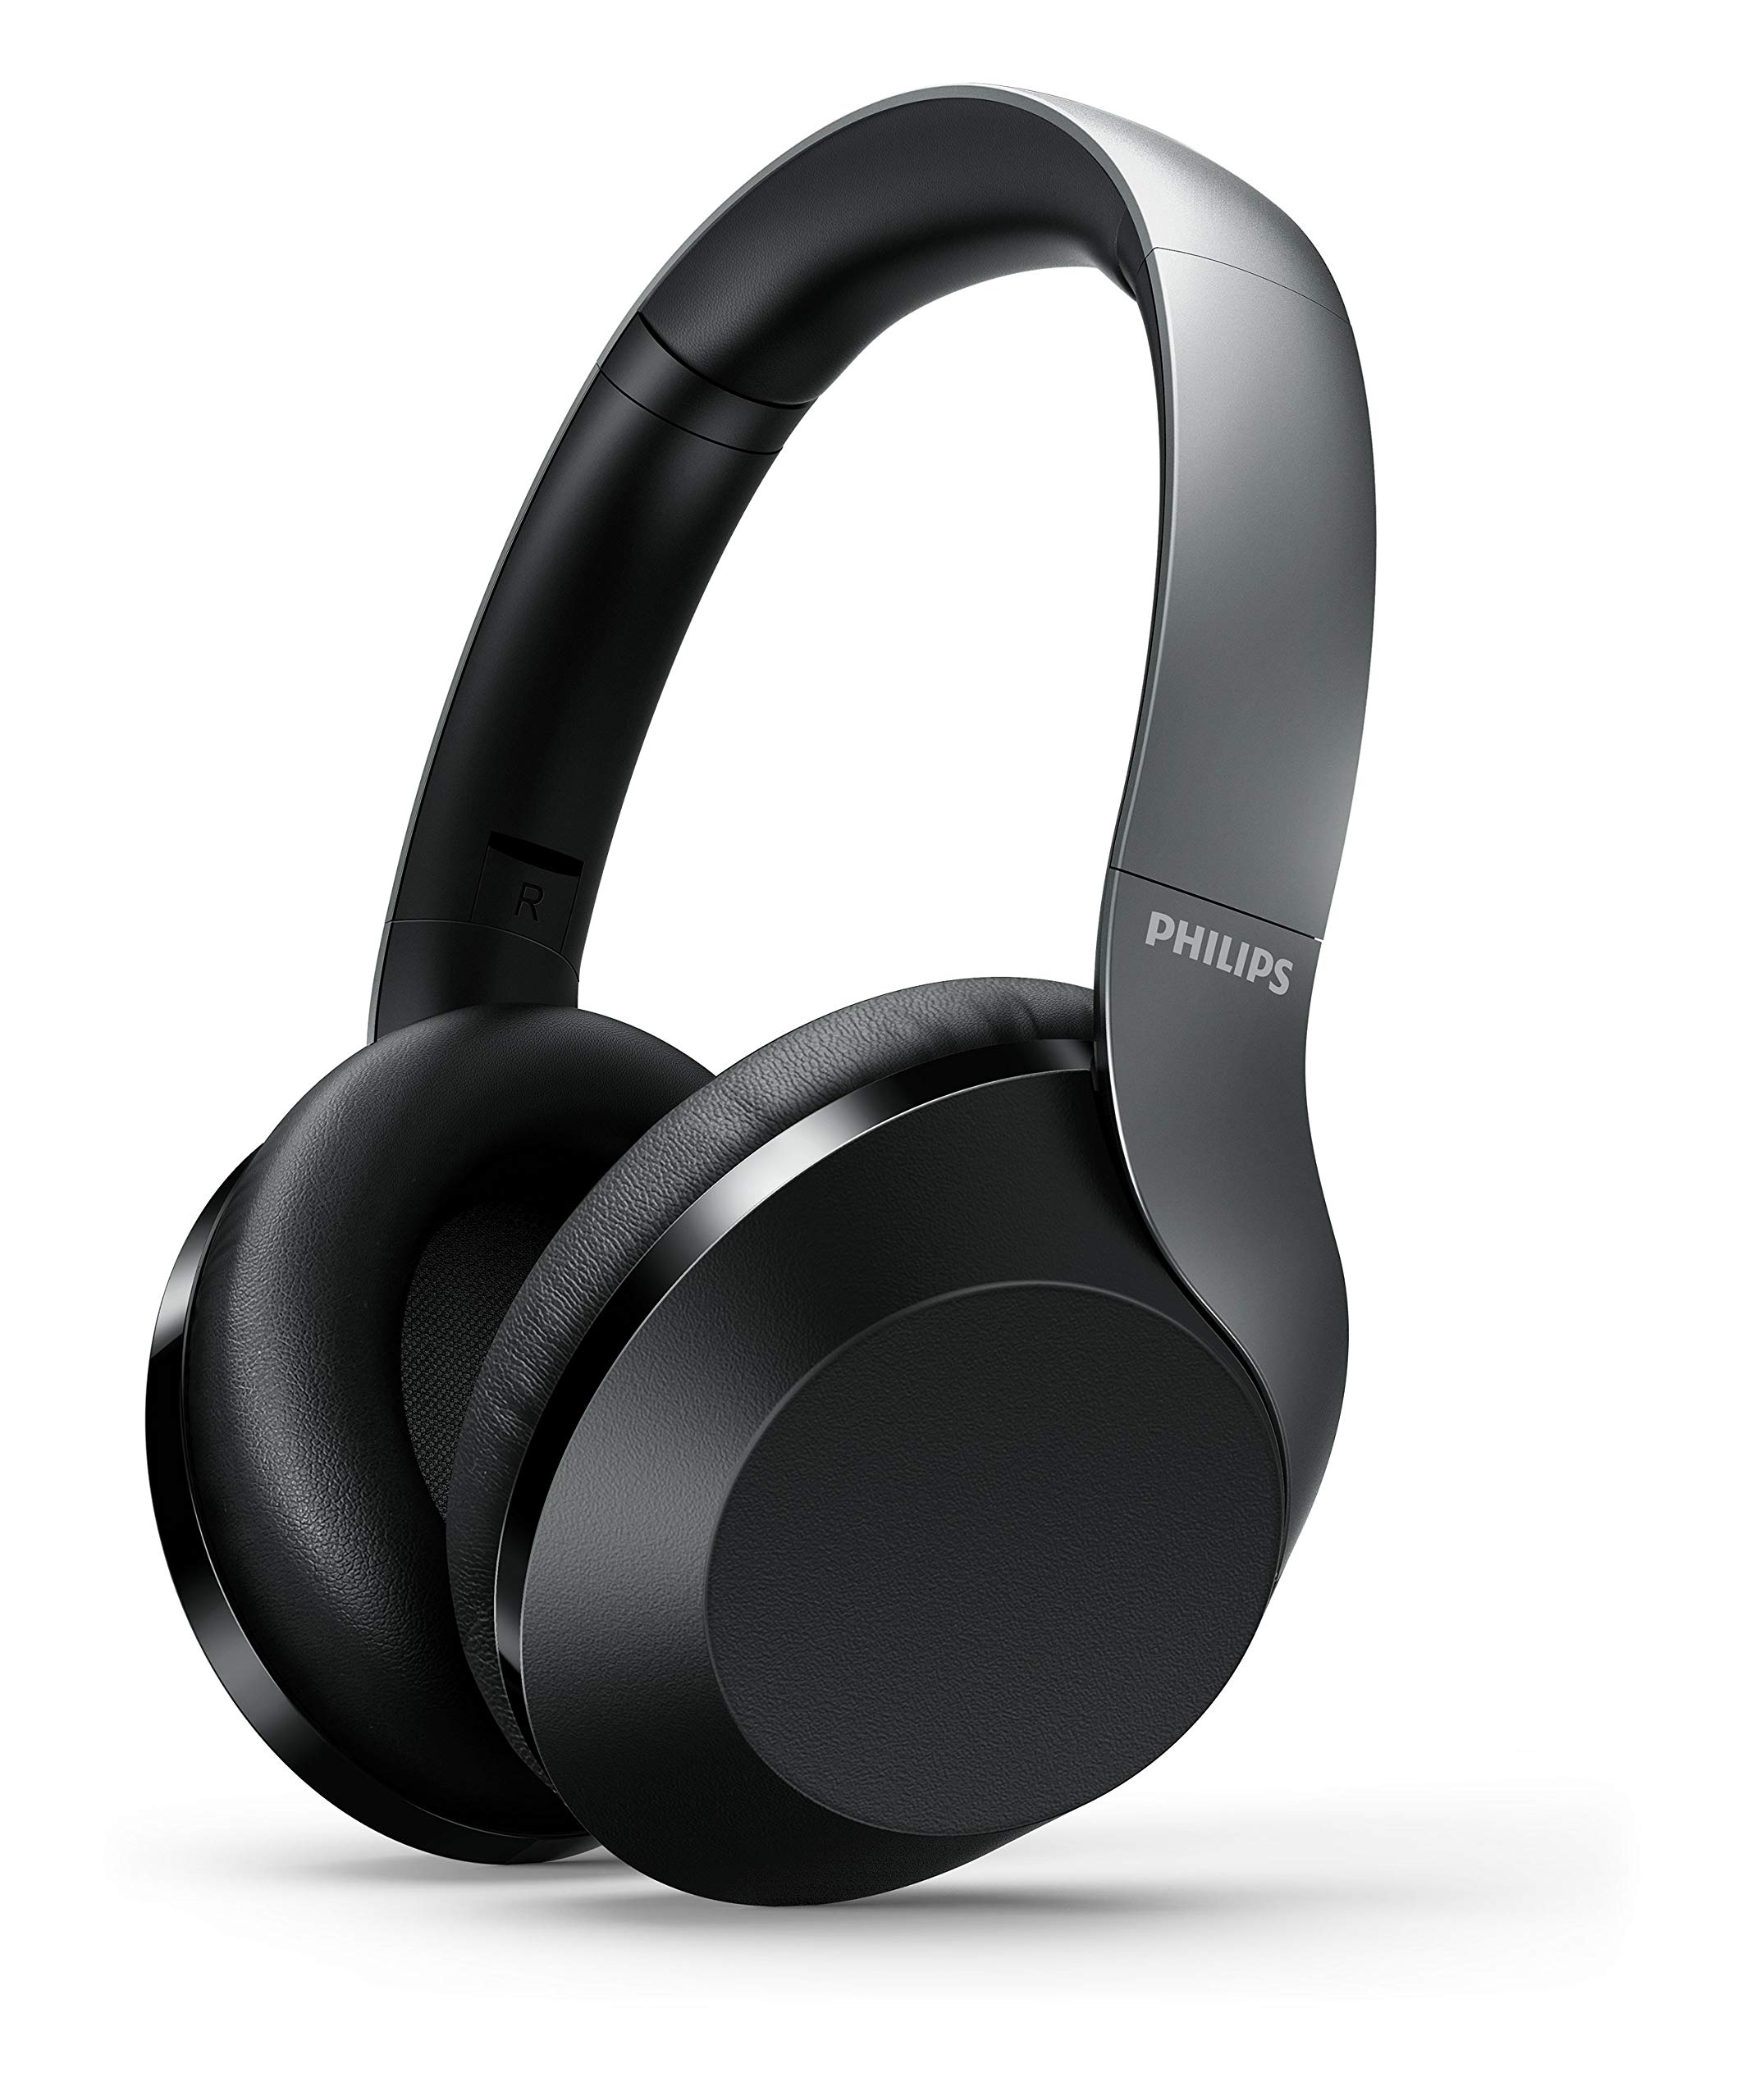 Philips Audio Performance TAPH805BK Bluetooth 5.0 Active Noise Cancelling Over-Ear Auriculares con Google Assistant (Negro)